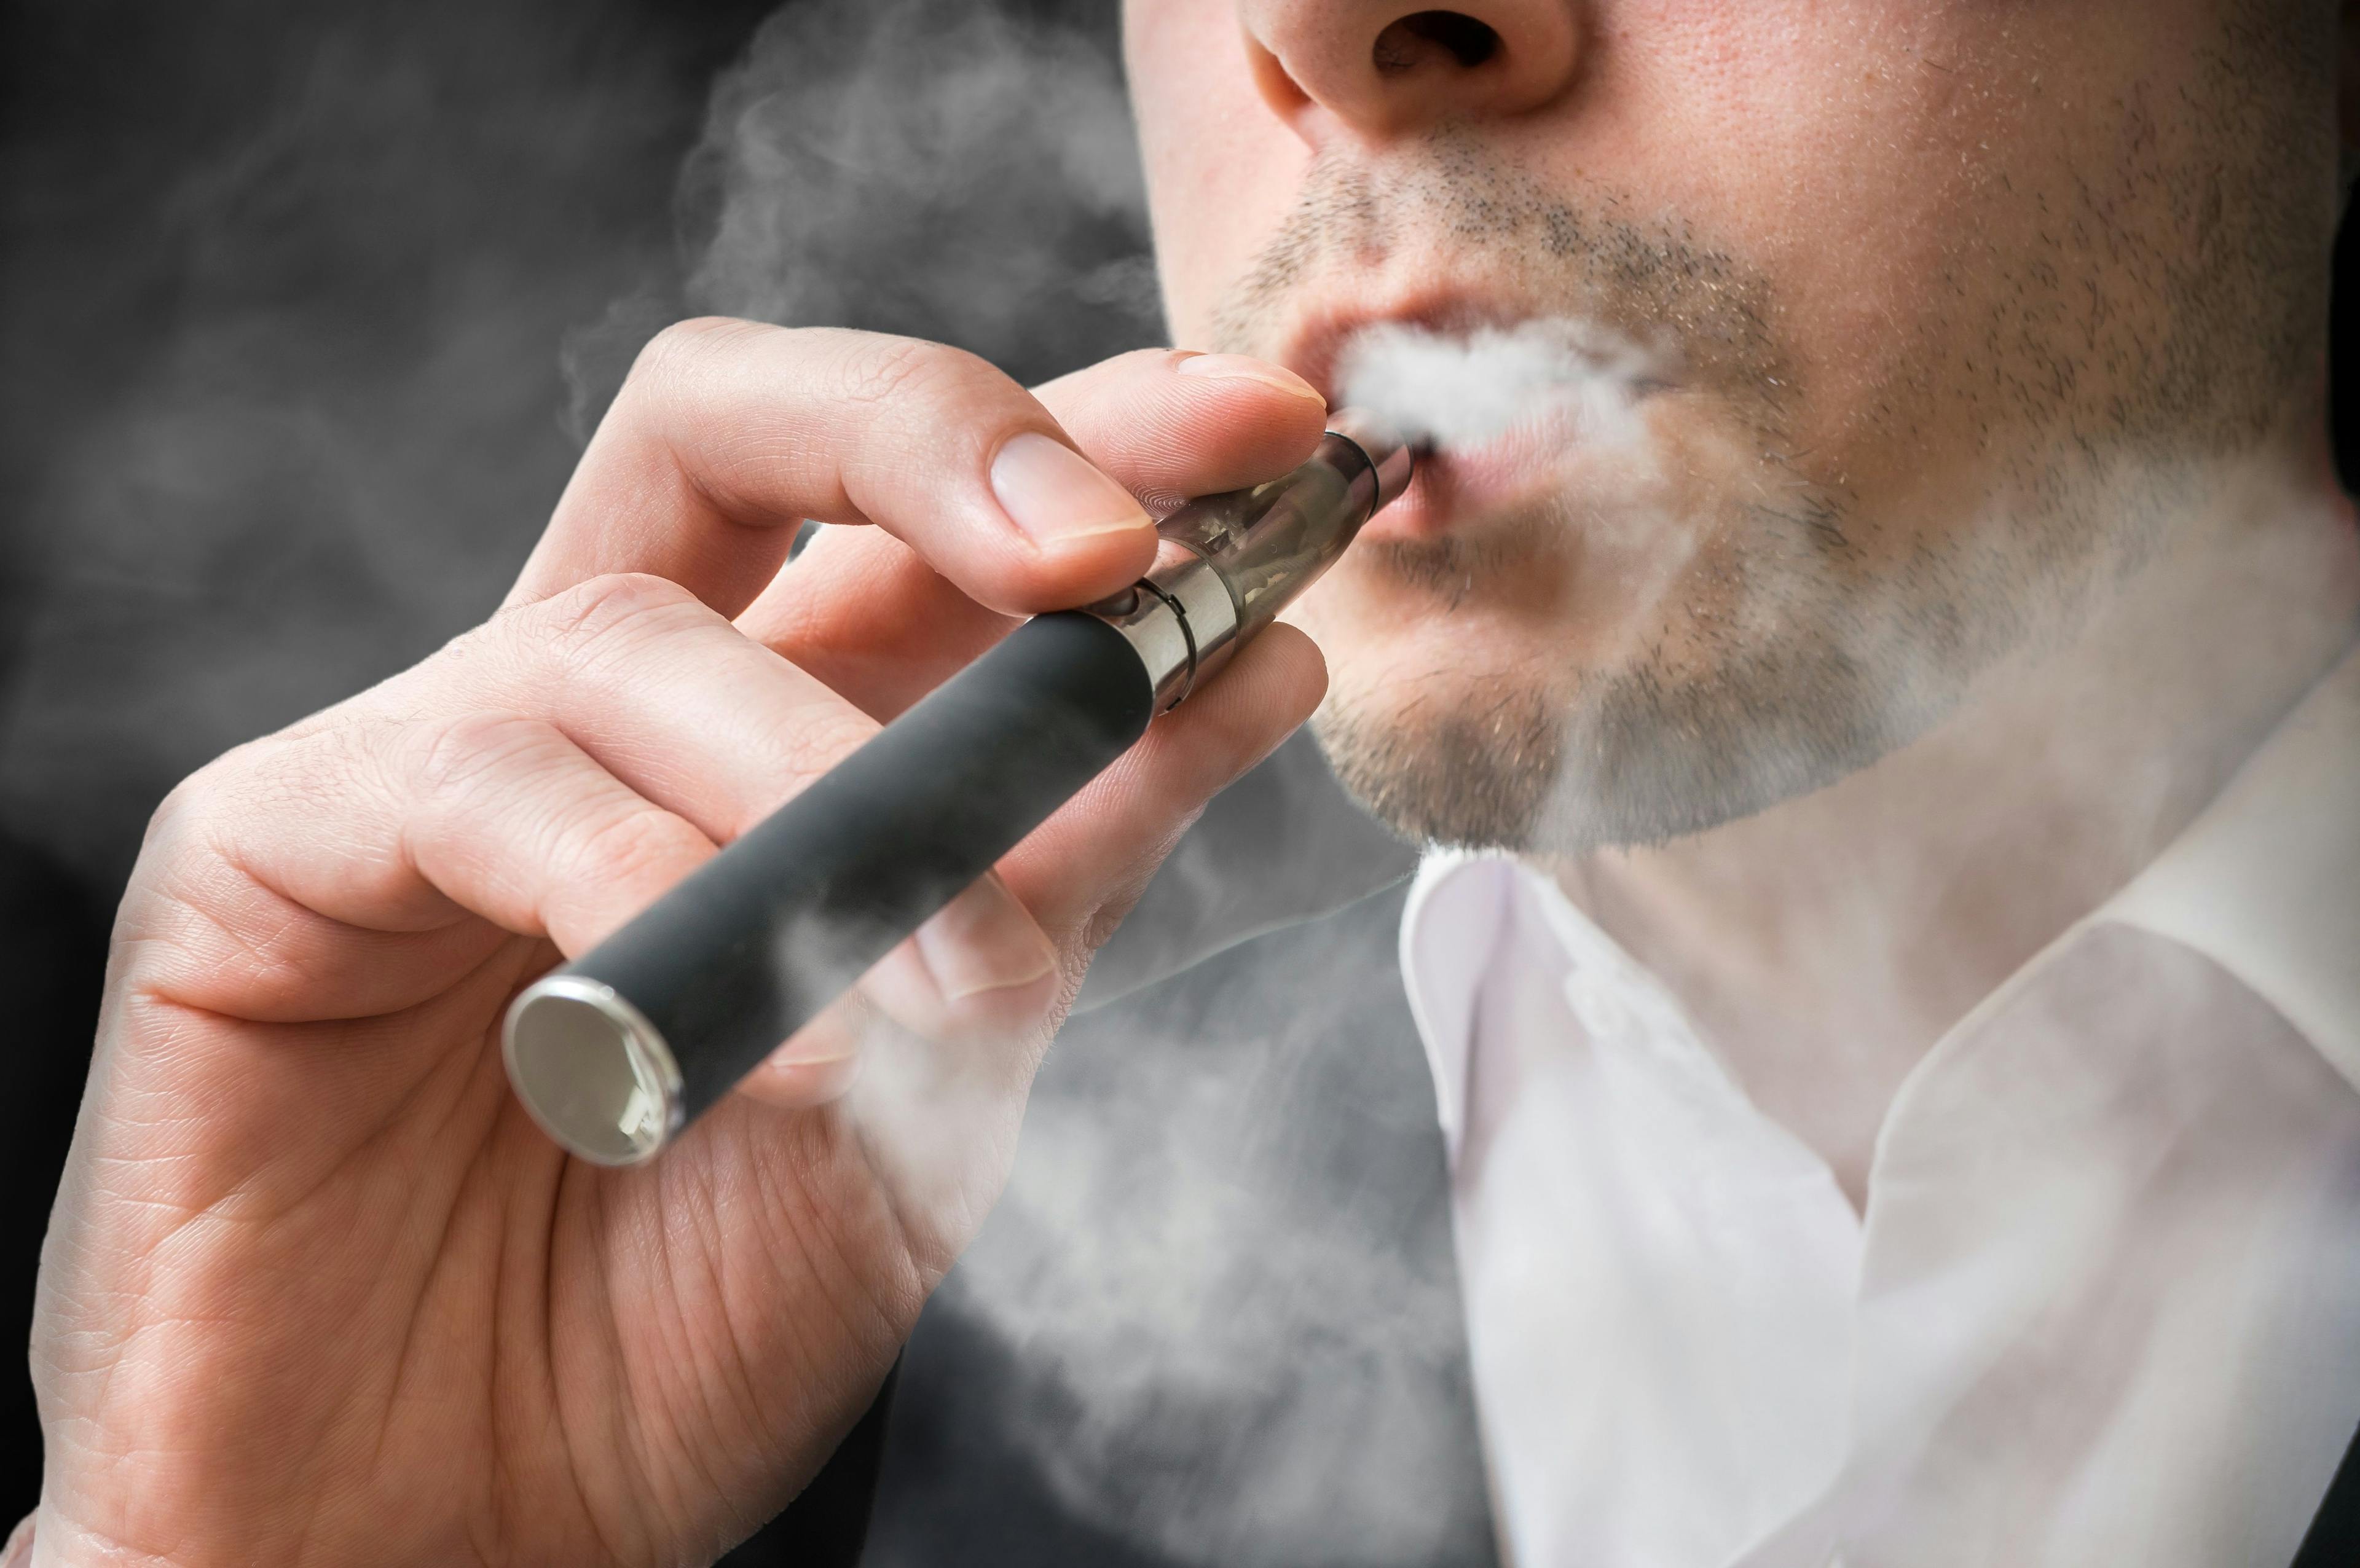 To Counsel Patients on e-Cigarette Use, More Information Is Needed